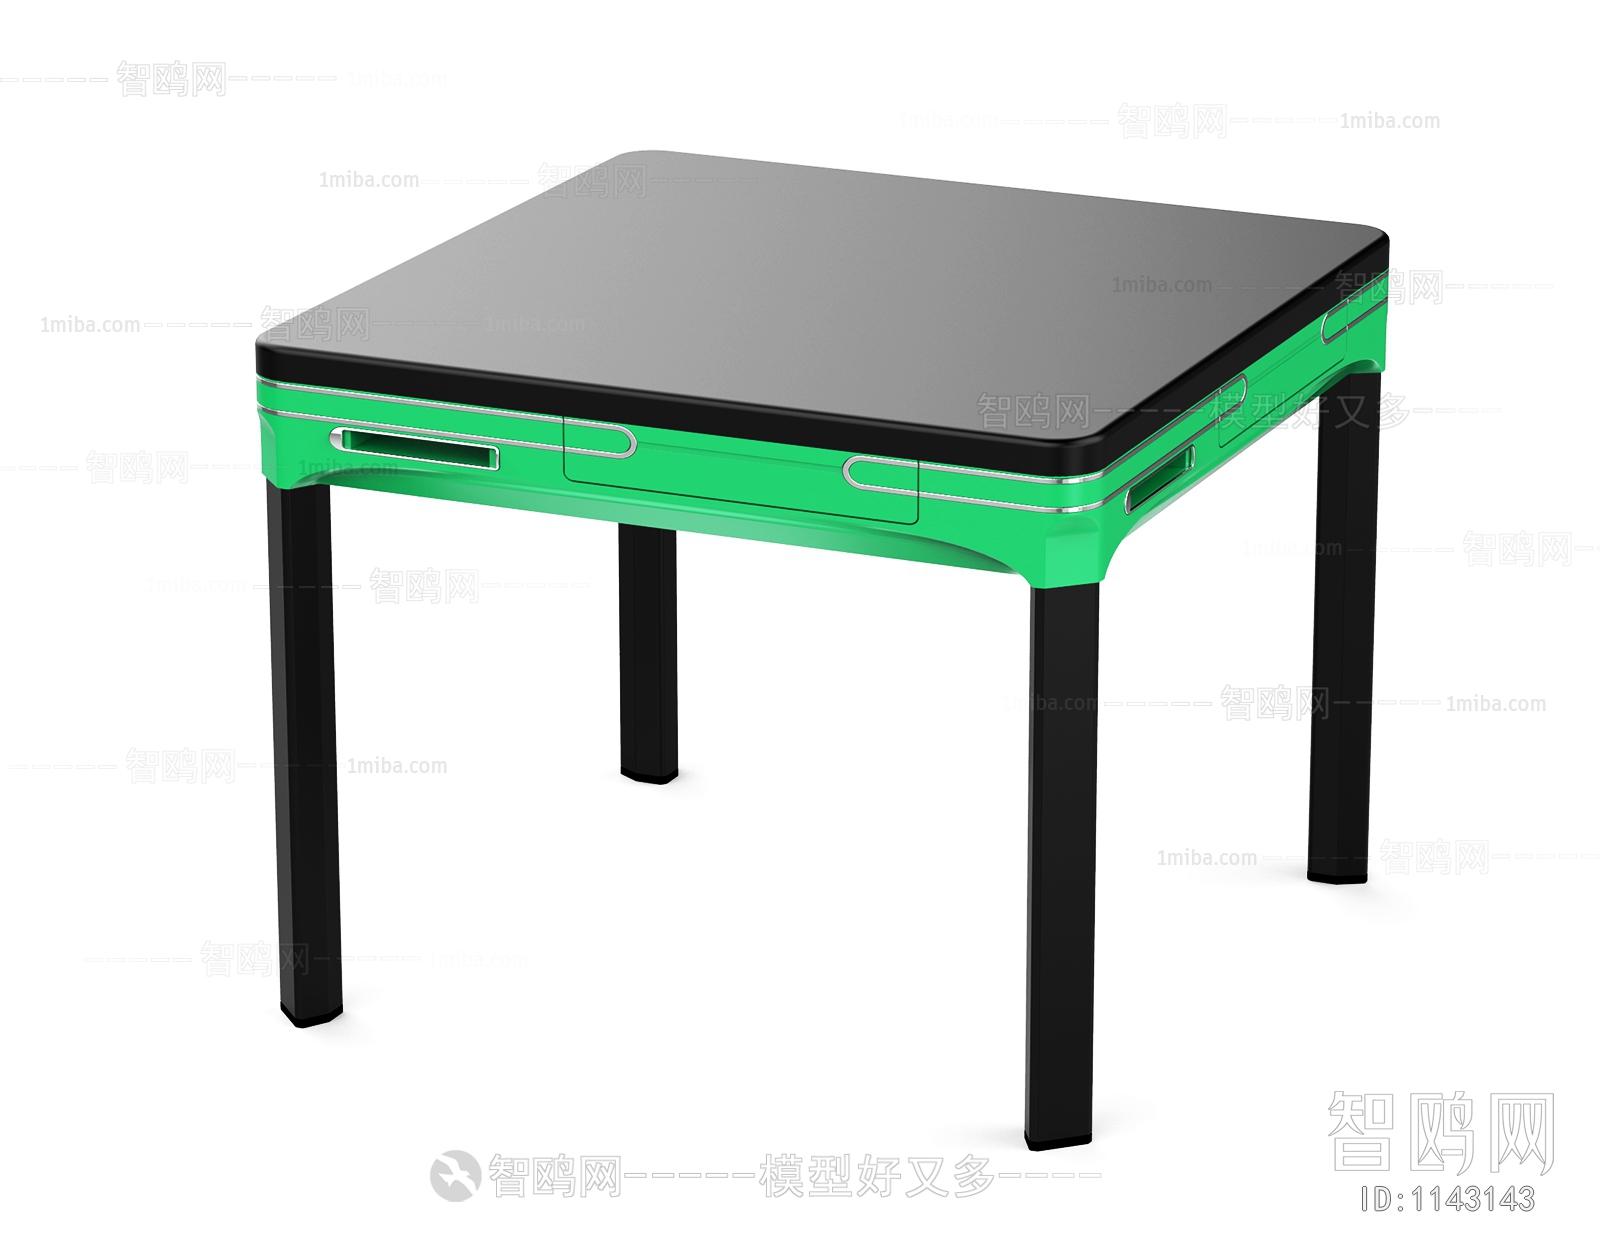 Modern Other Table